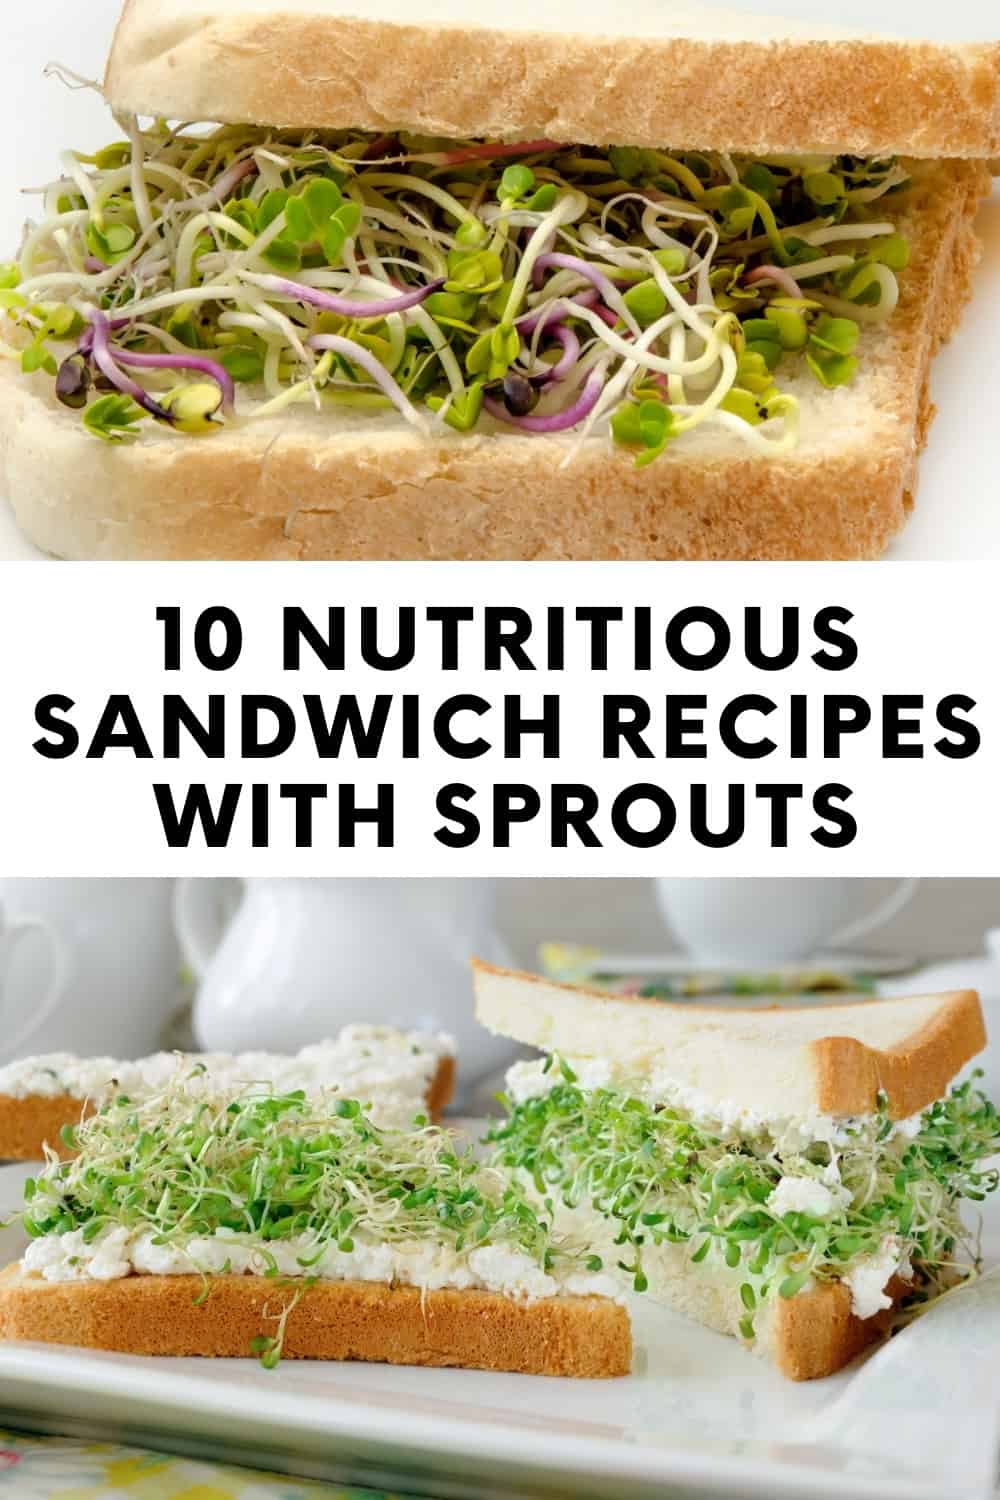 Discover 10 delectable sandwich recipes incorporating the freshness and nutritional benefits of sprouts.